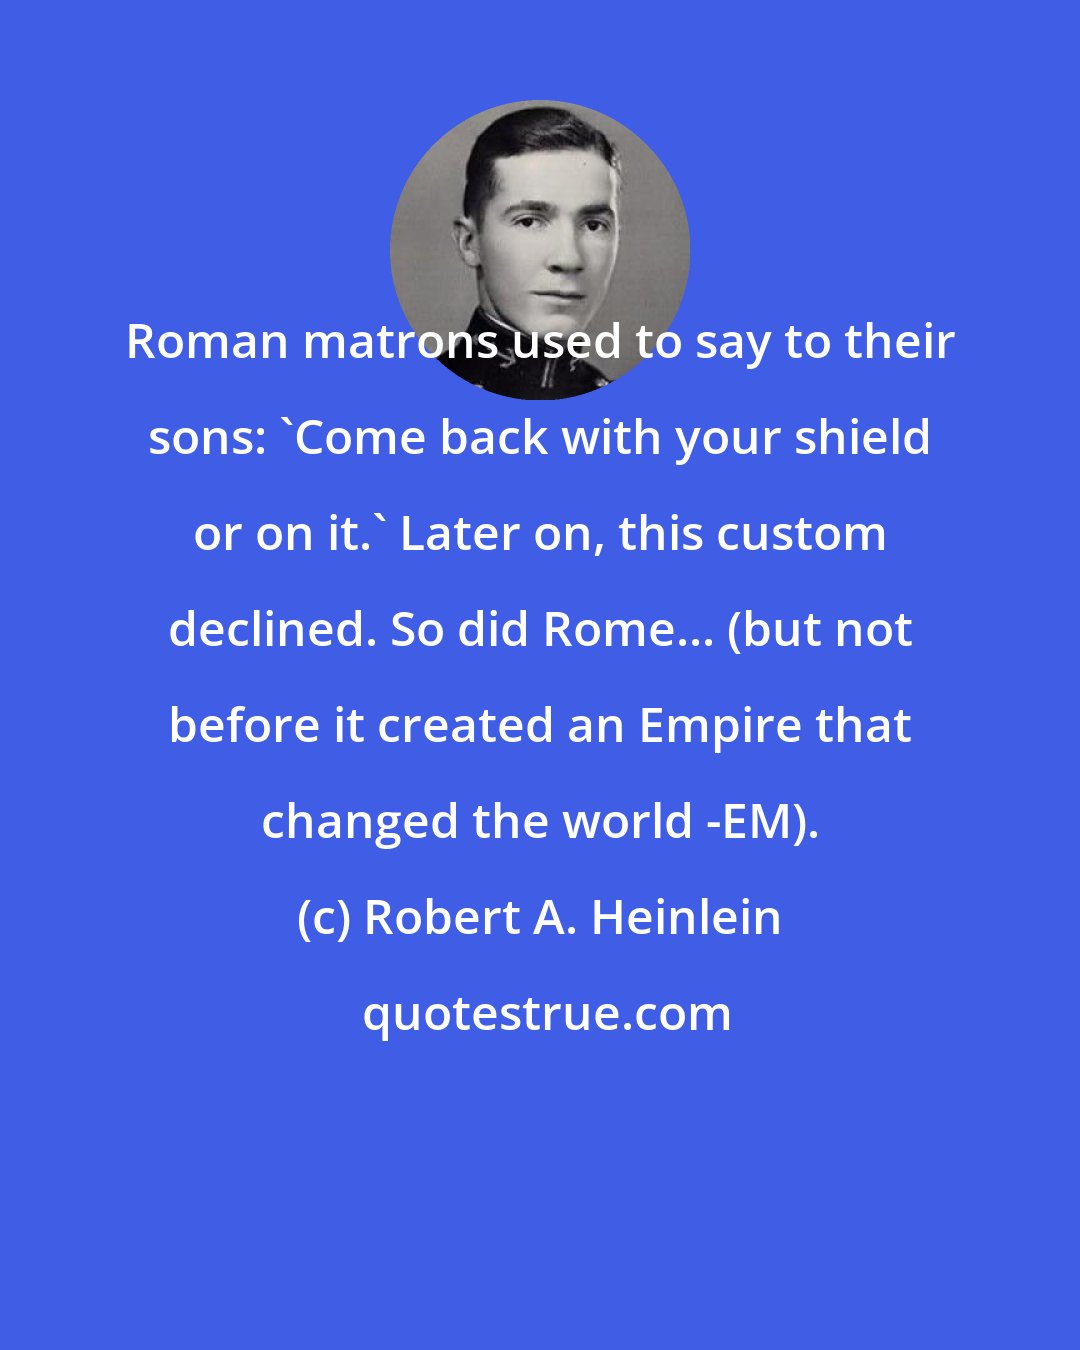 Robert A. Heinlein: Roman matrons used to say to their sons: 'Come back with your shield or on it.' Later on, this custom declined. So did Rome... (but not before it created an Empire that changed the world -EM).